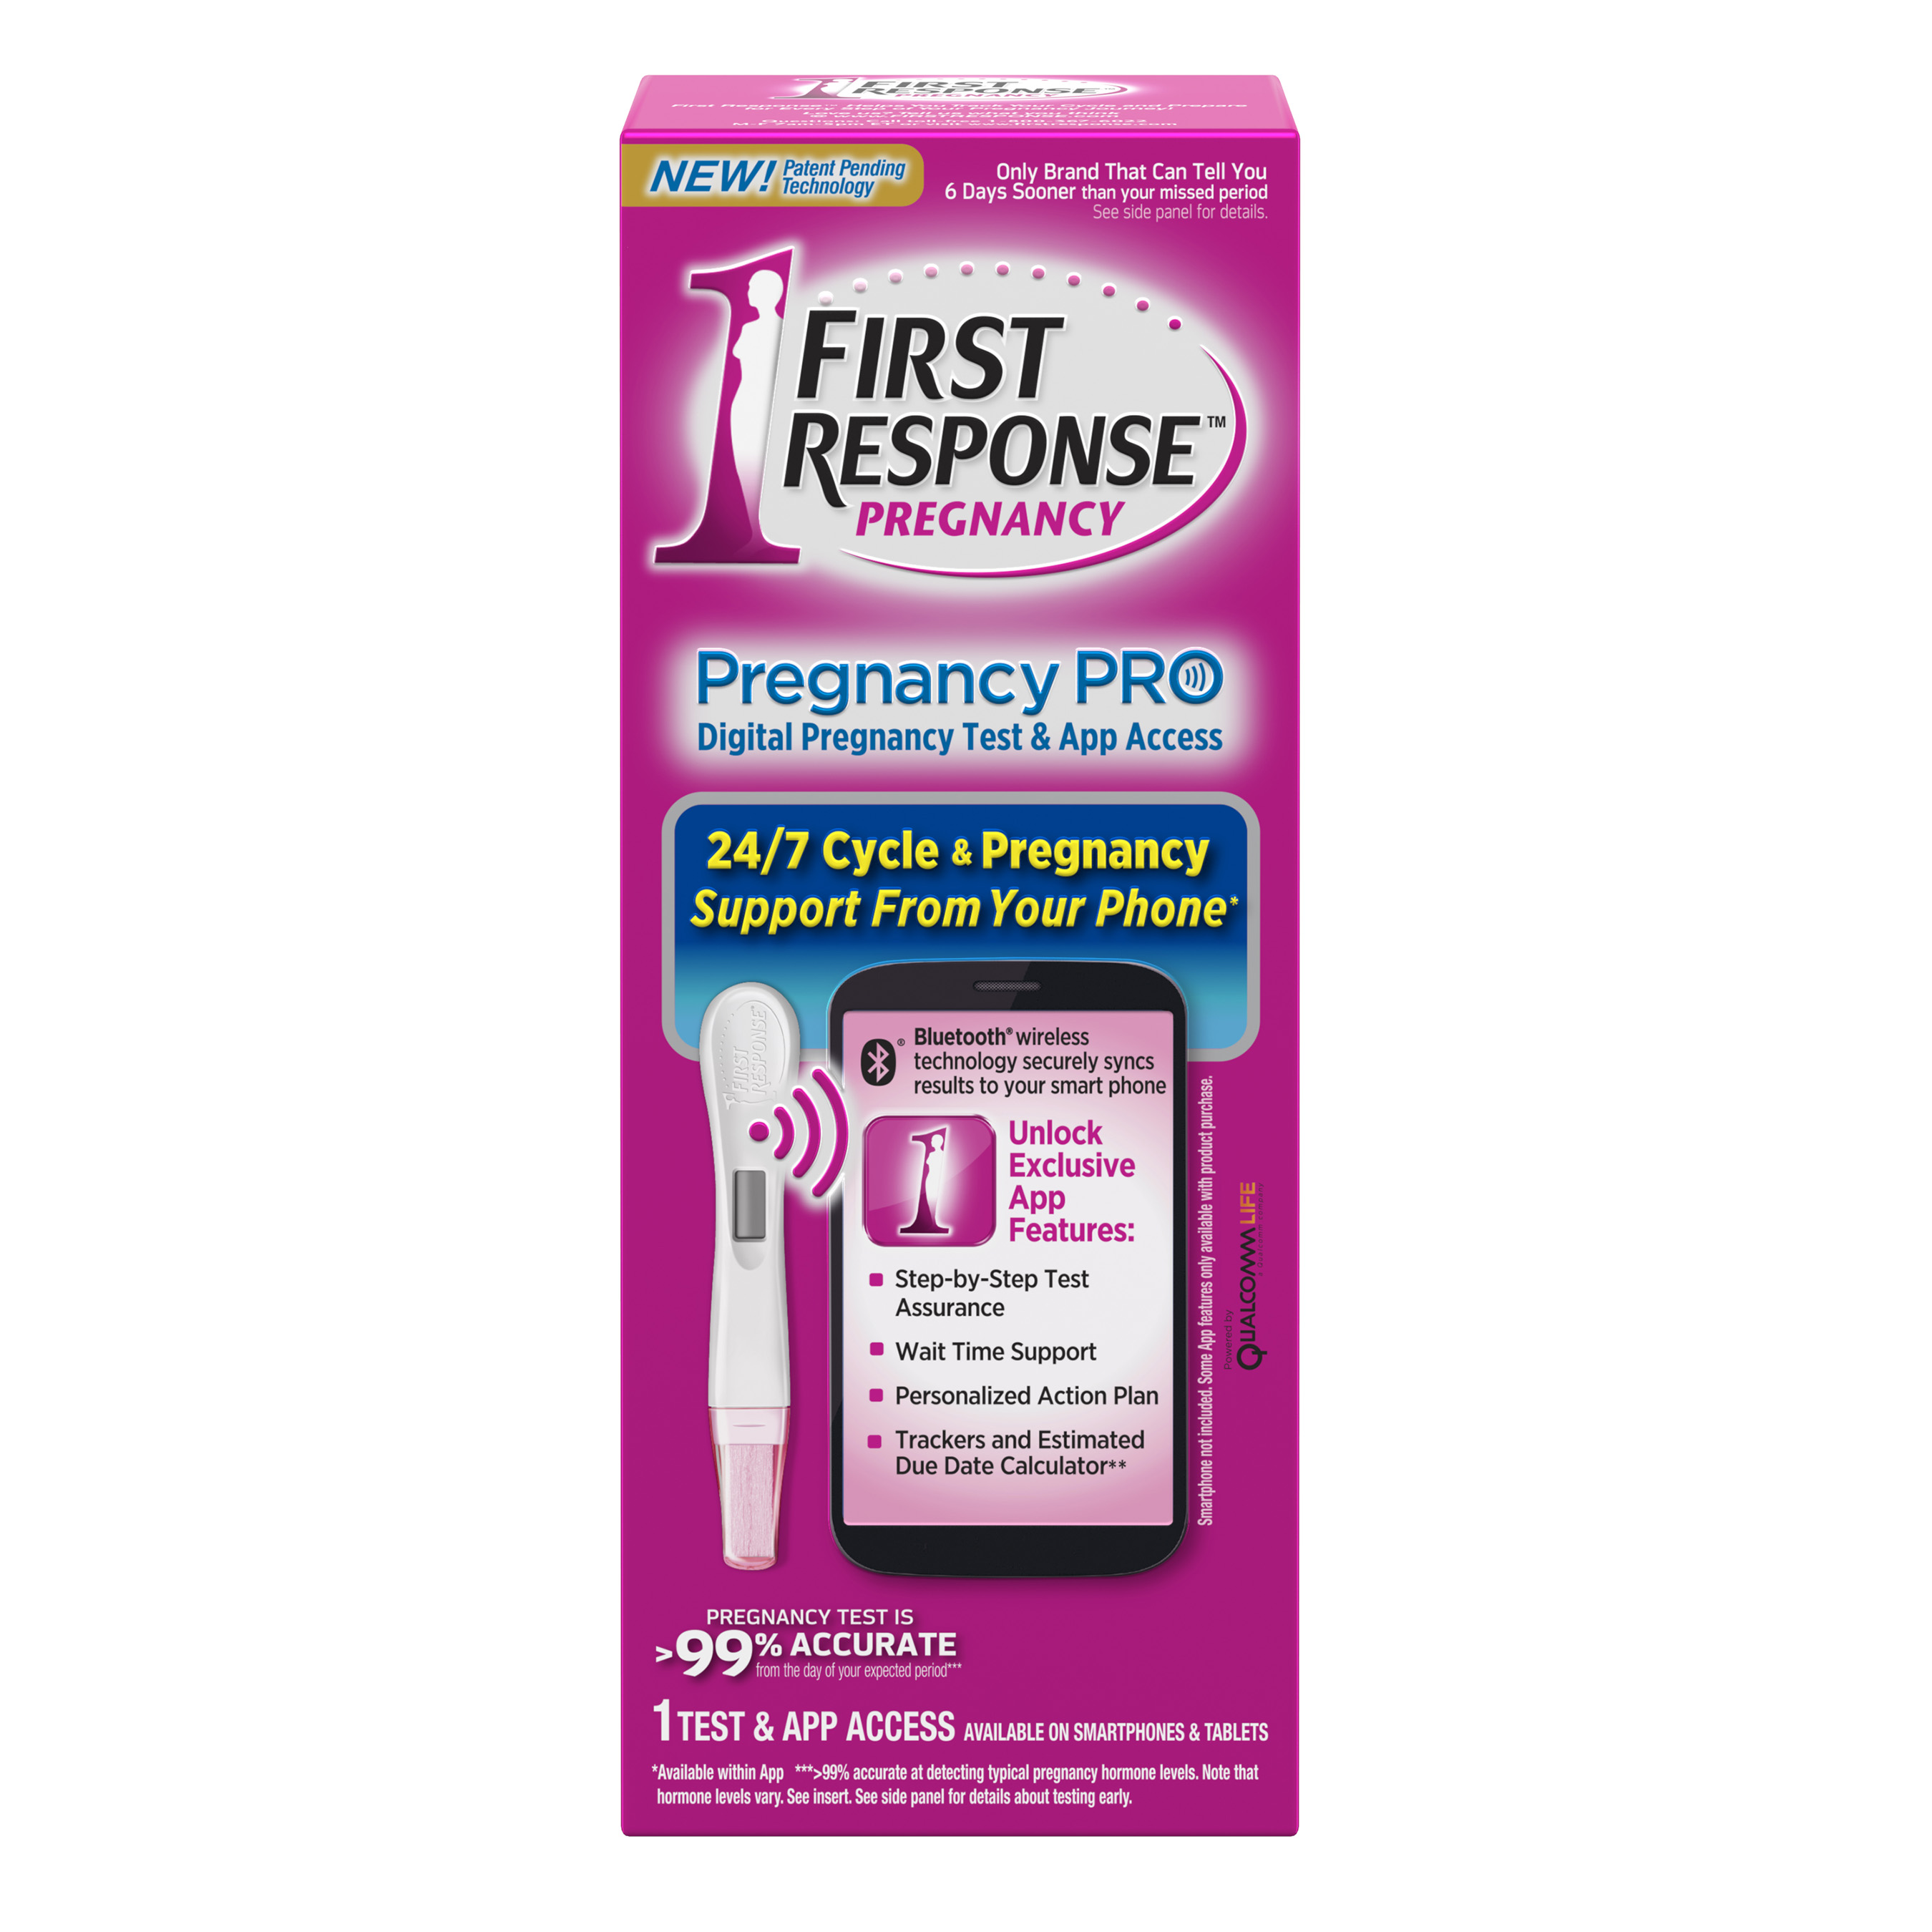 Product packaging of First Response™ Pregnancy PRO Digital Pregnancy Test and App Access, the first Bluetooth® enabled pregnancy test, unveiled at 2016 CES